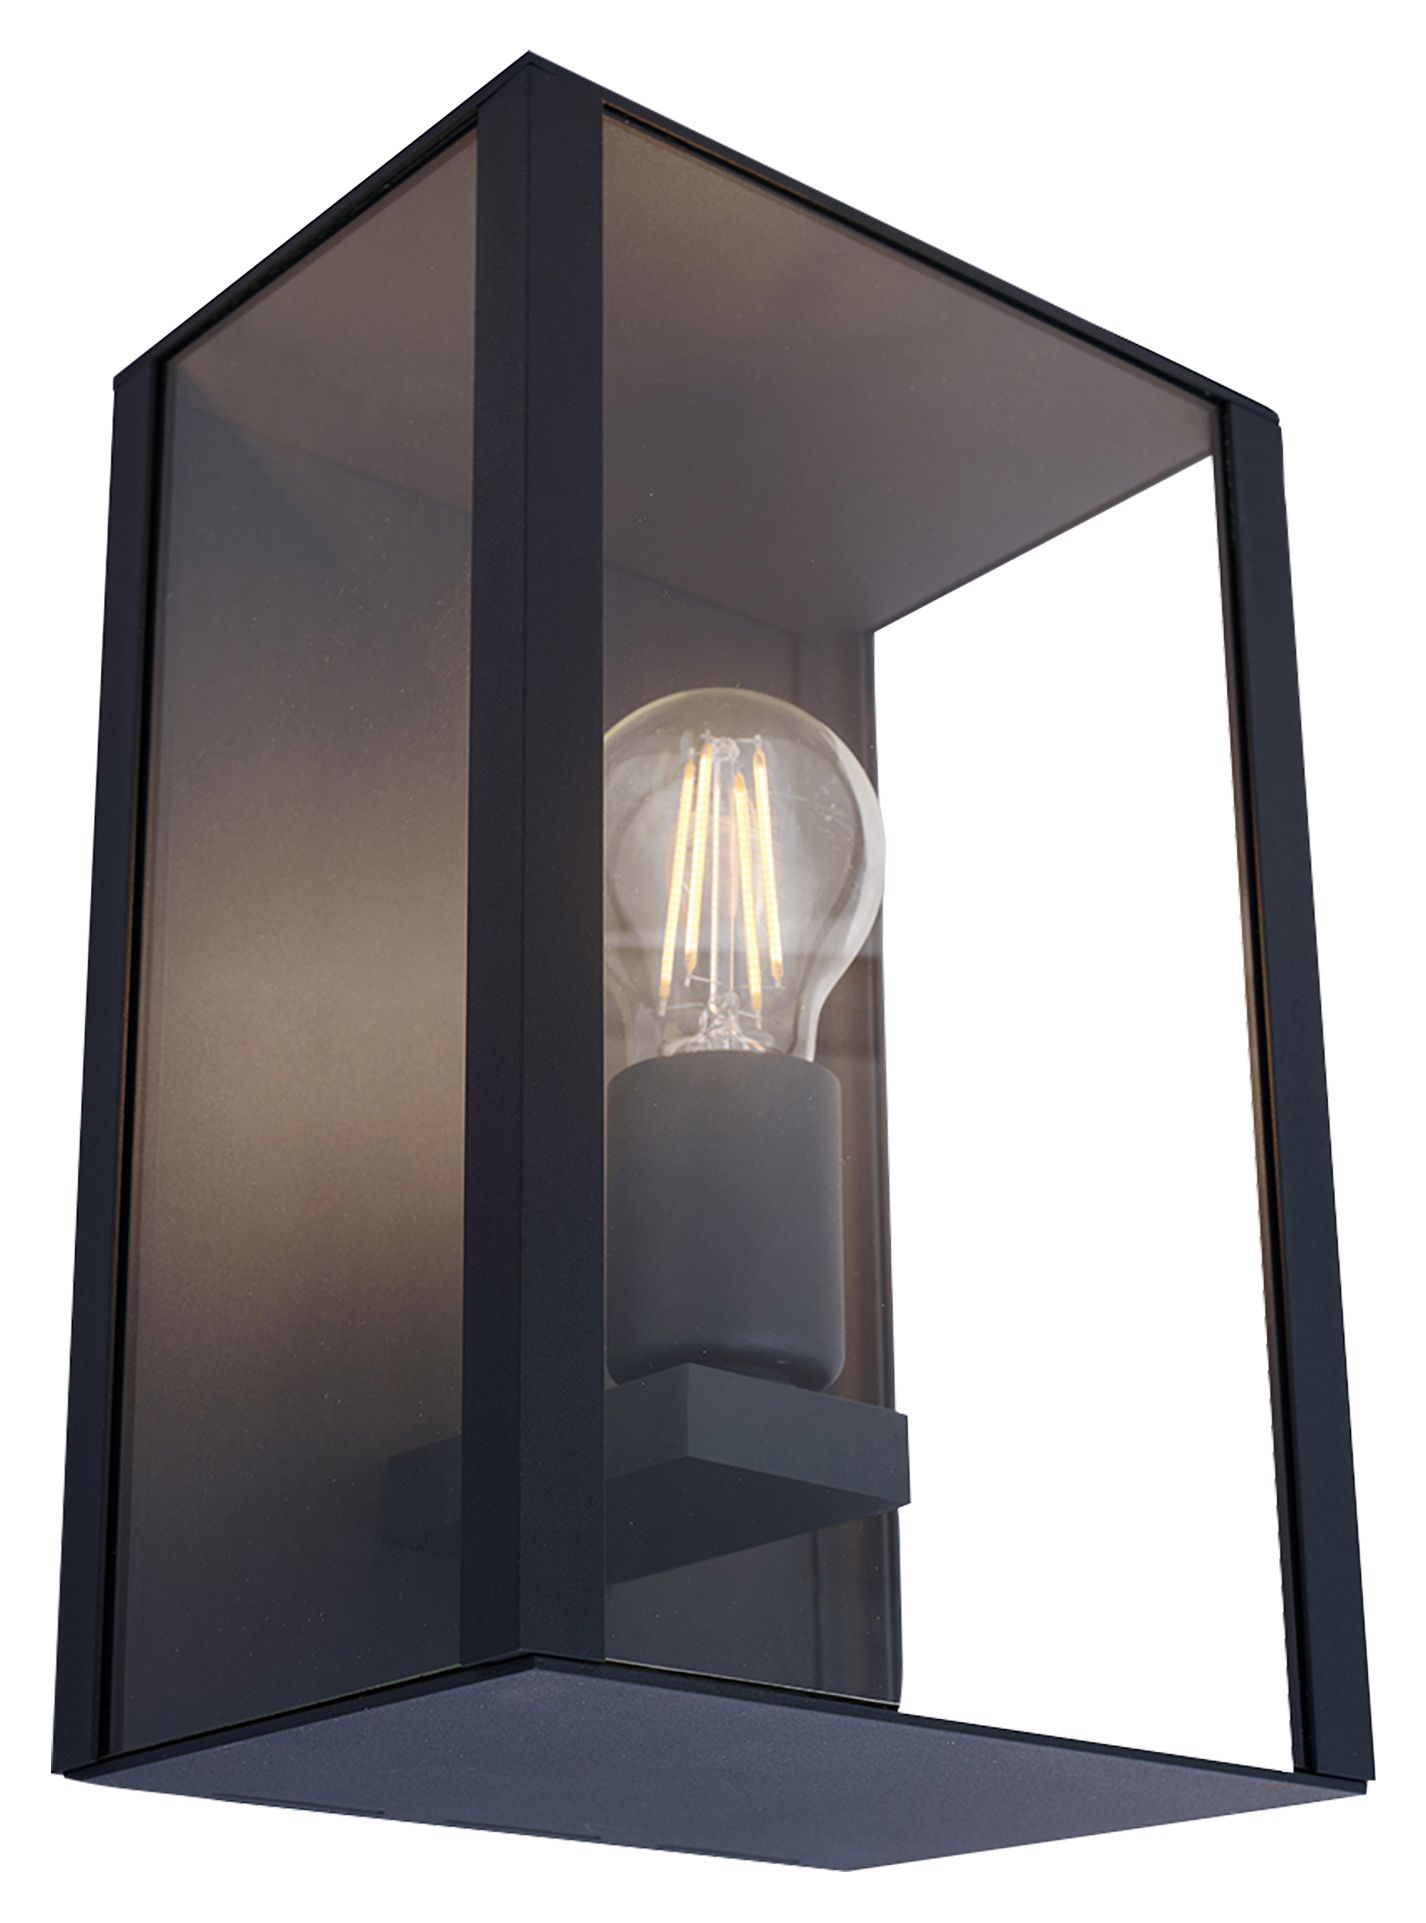 4lite WiZ Smart LED IP44 Exterior Wall Light with A60 E27 Filament Lamp